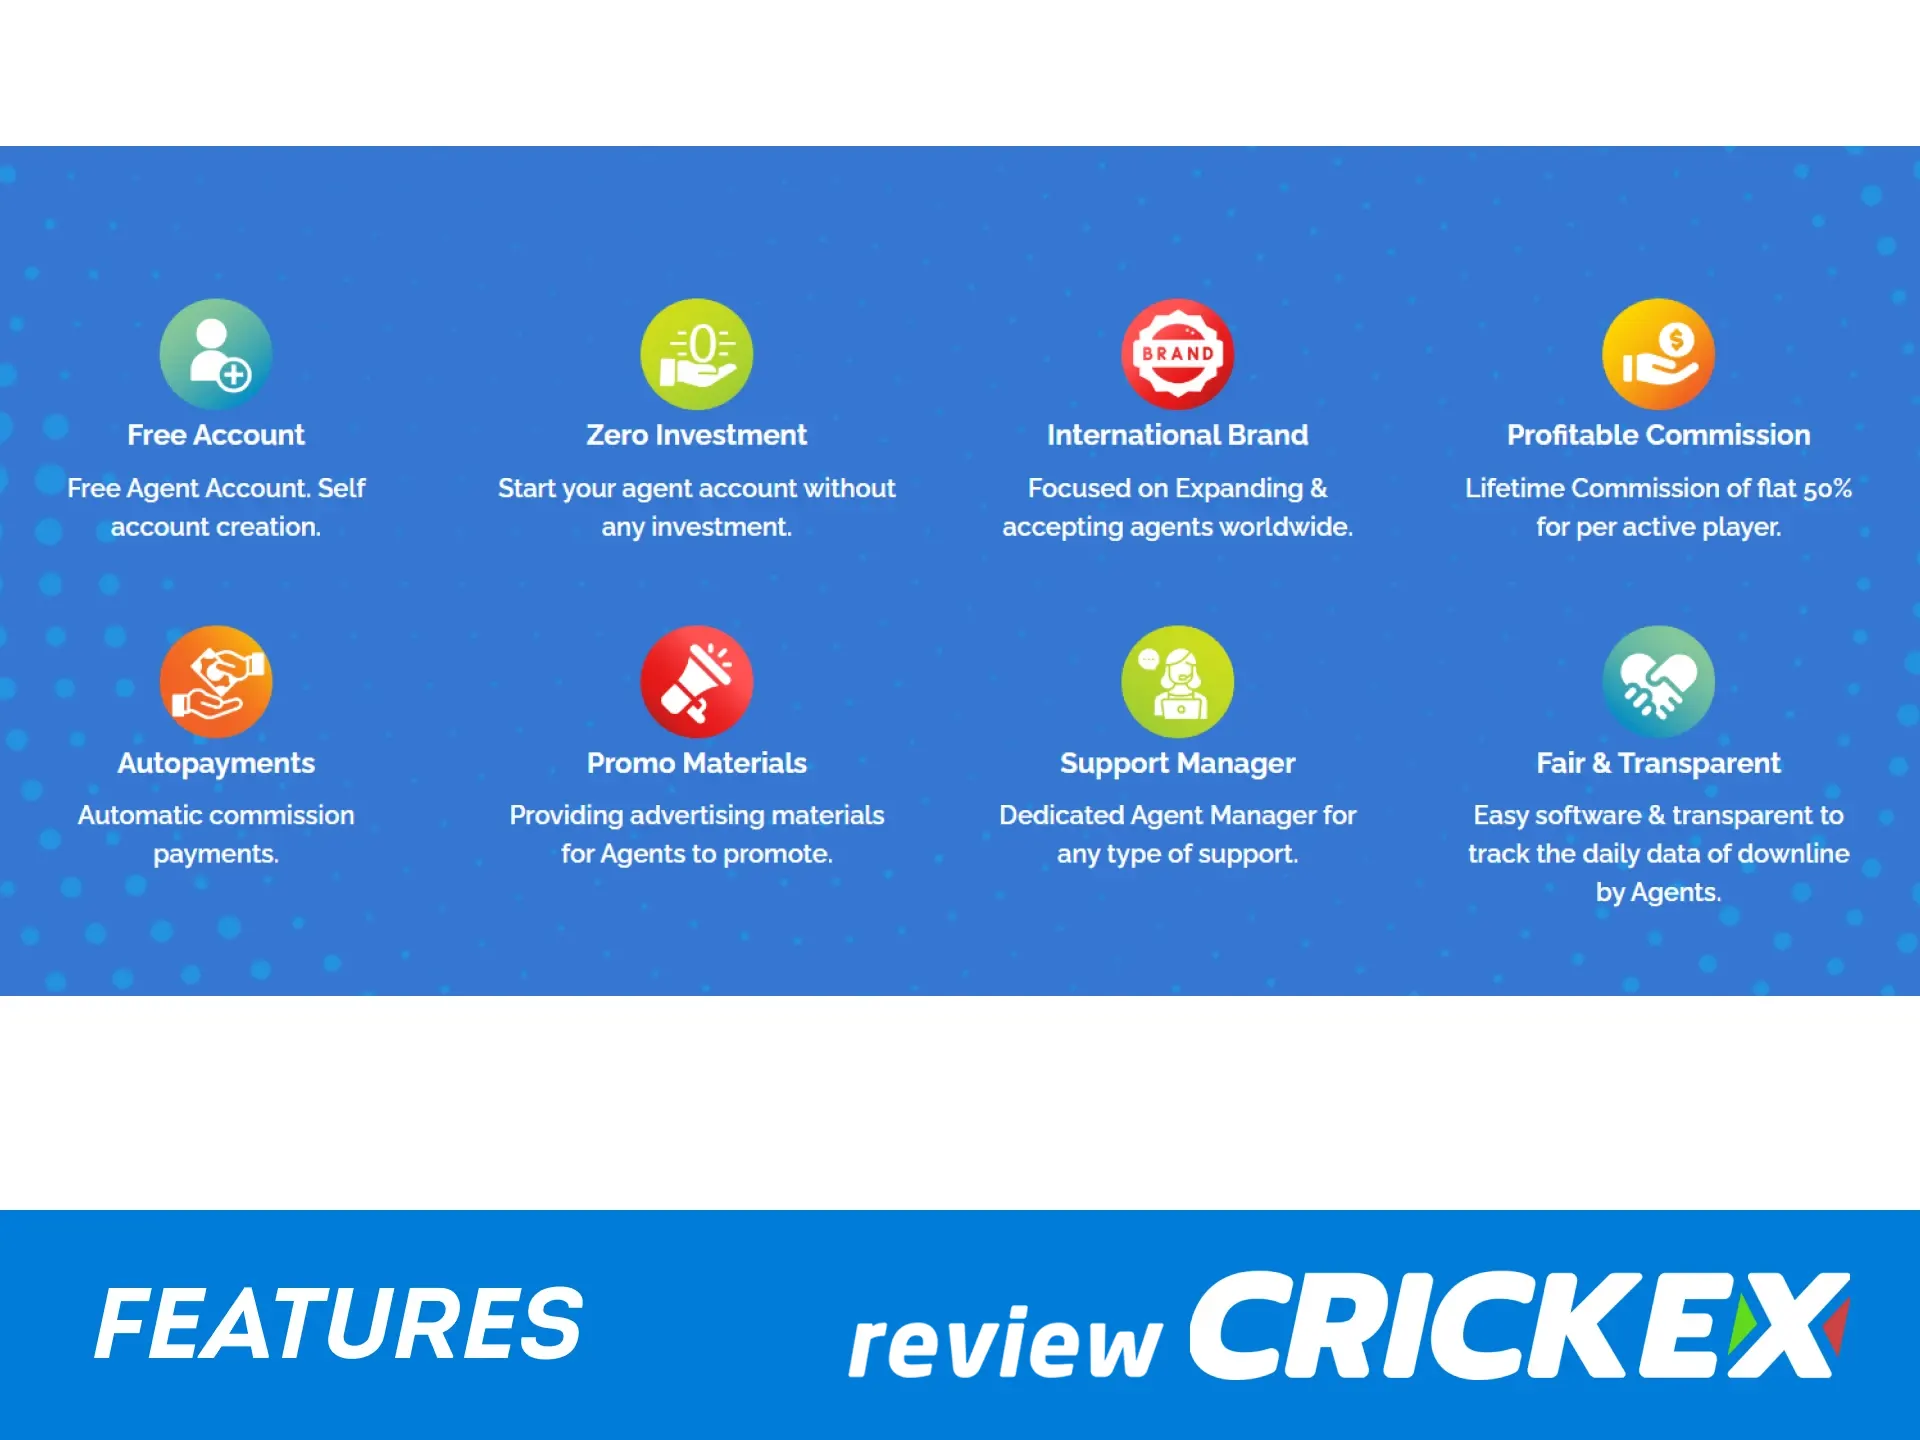 Find out what the Crickex team is preparing for their affiliate program.